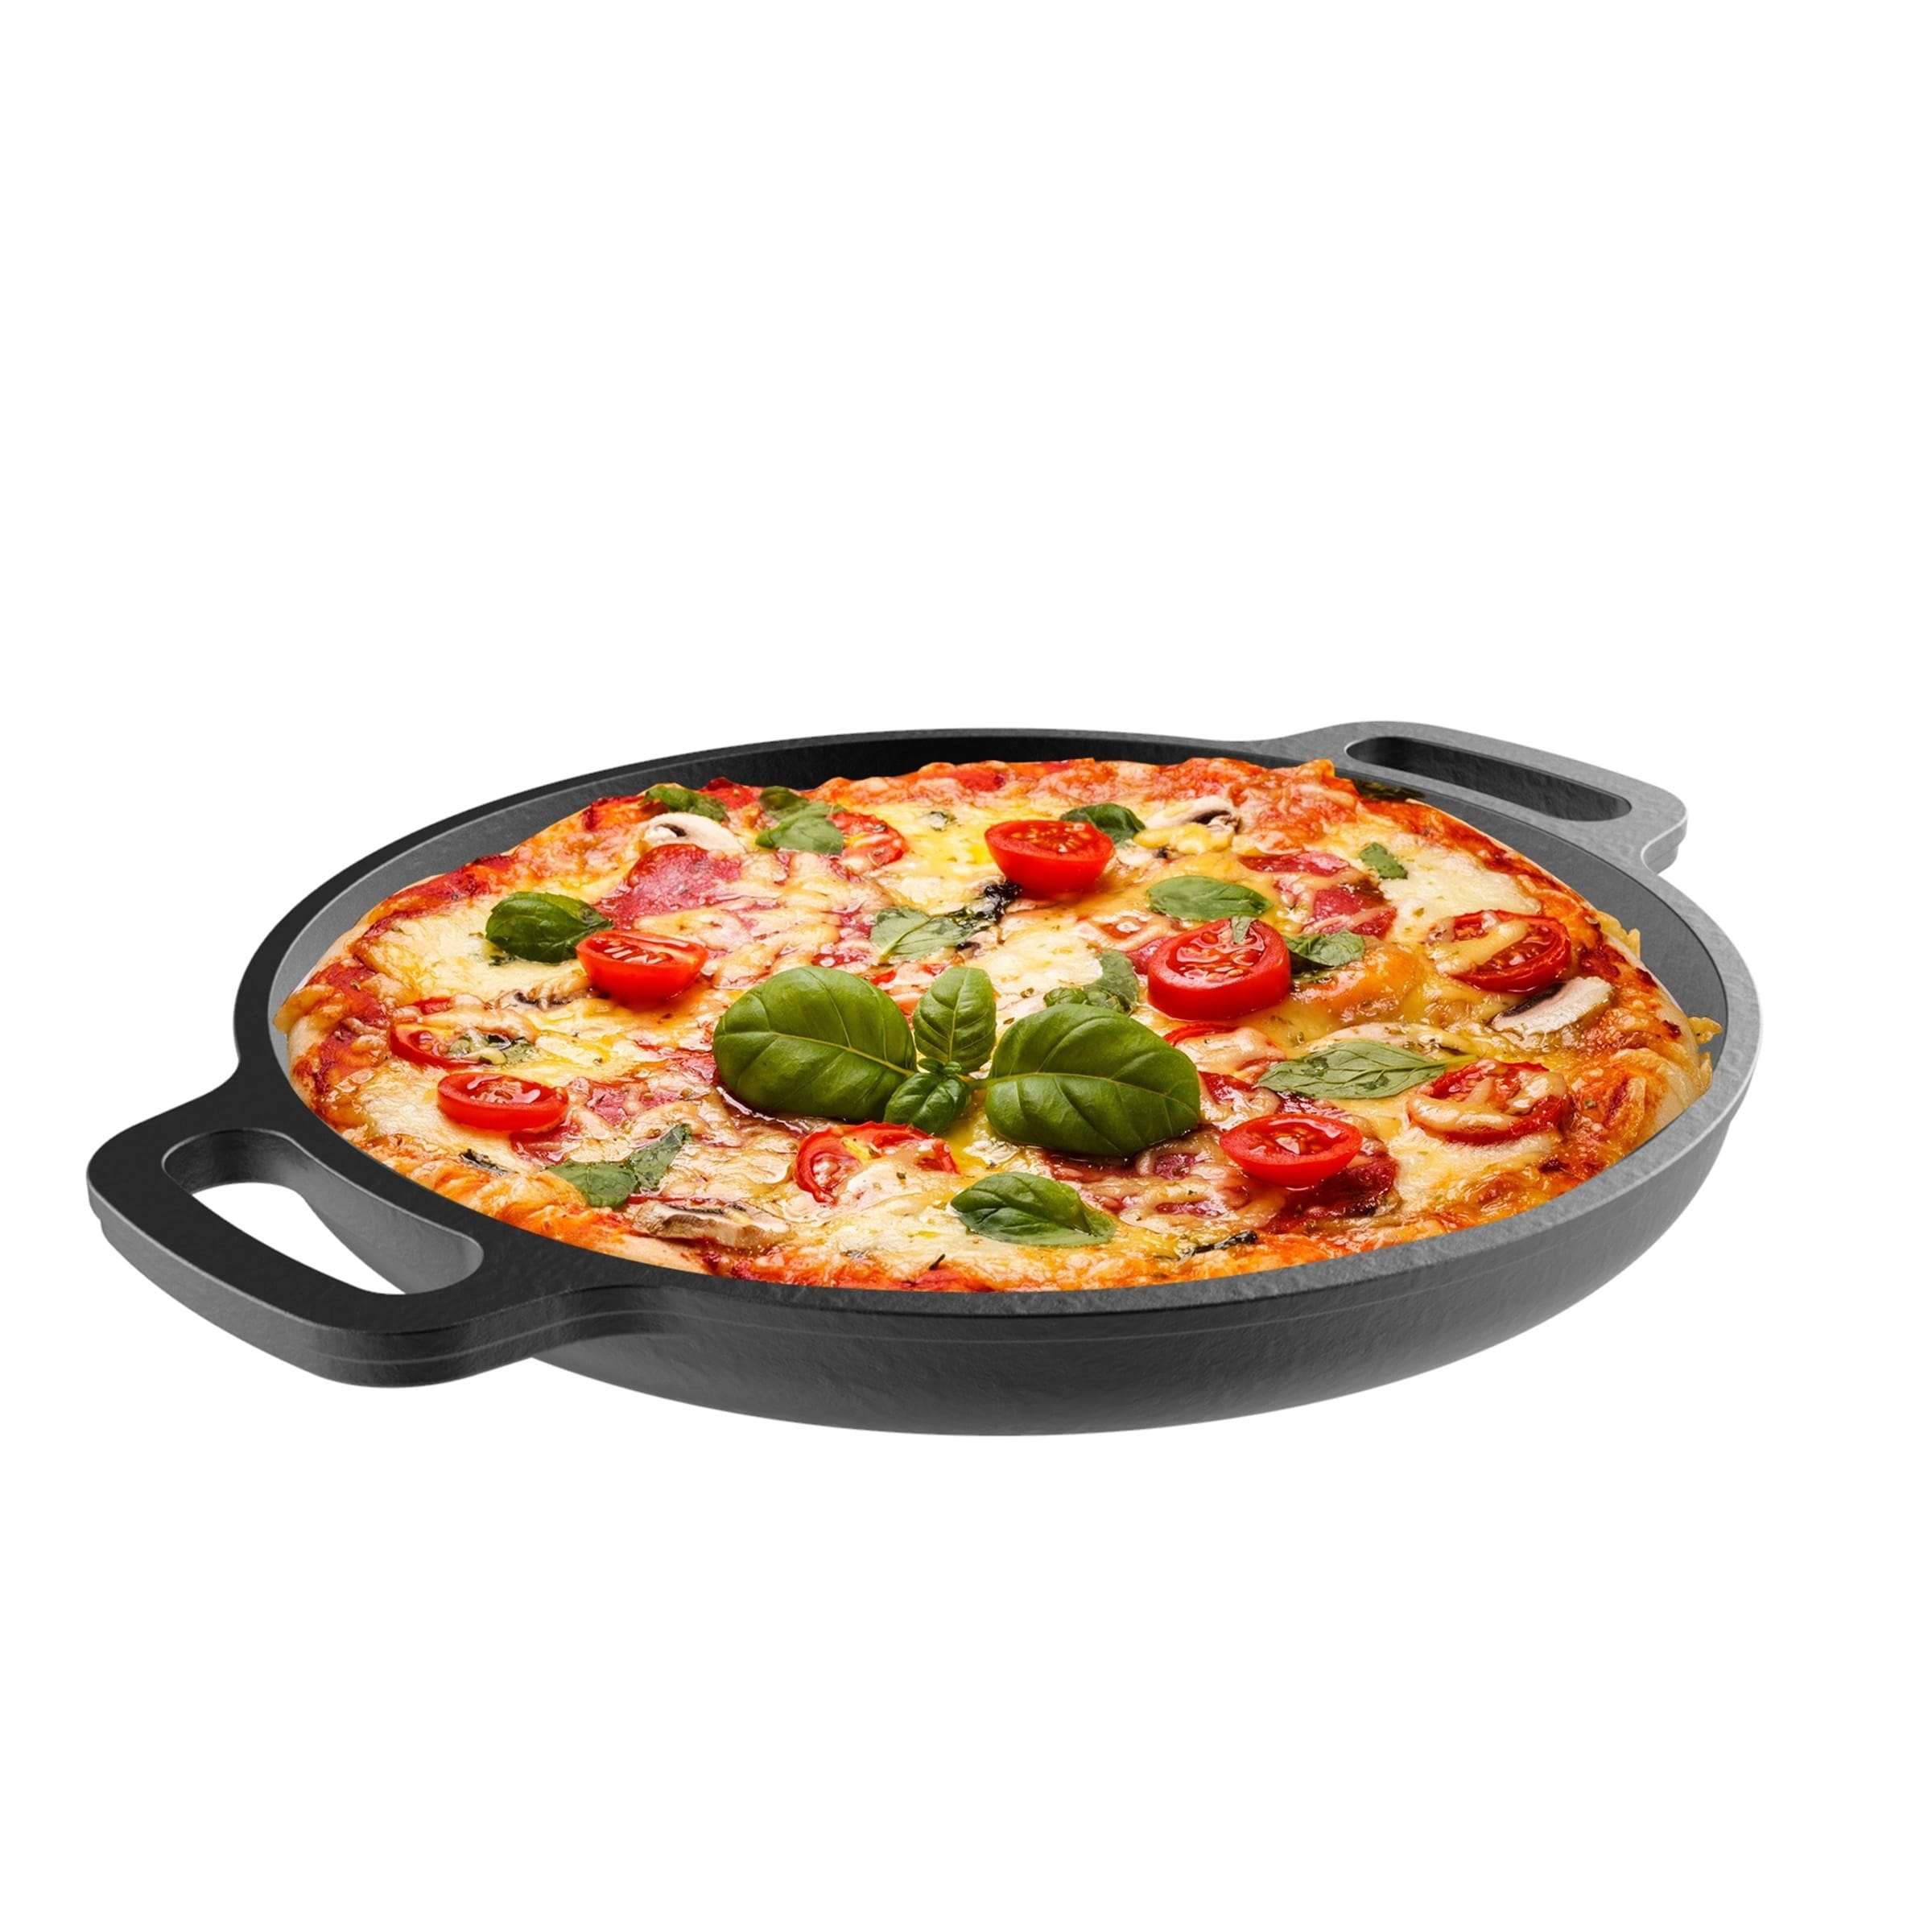 https://ak1.ostkcdn.com/images/products/22897374/Cast-Iron-Pizza-Pan-13.25-Pre-Seasoned-Skillet-for-Cooking-Baking-Grilling-Durable-Long-Lasting-by-Classic-Cuisine-9aca2807-a590-4f06-924d-32232586fe94.jpg